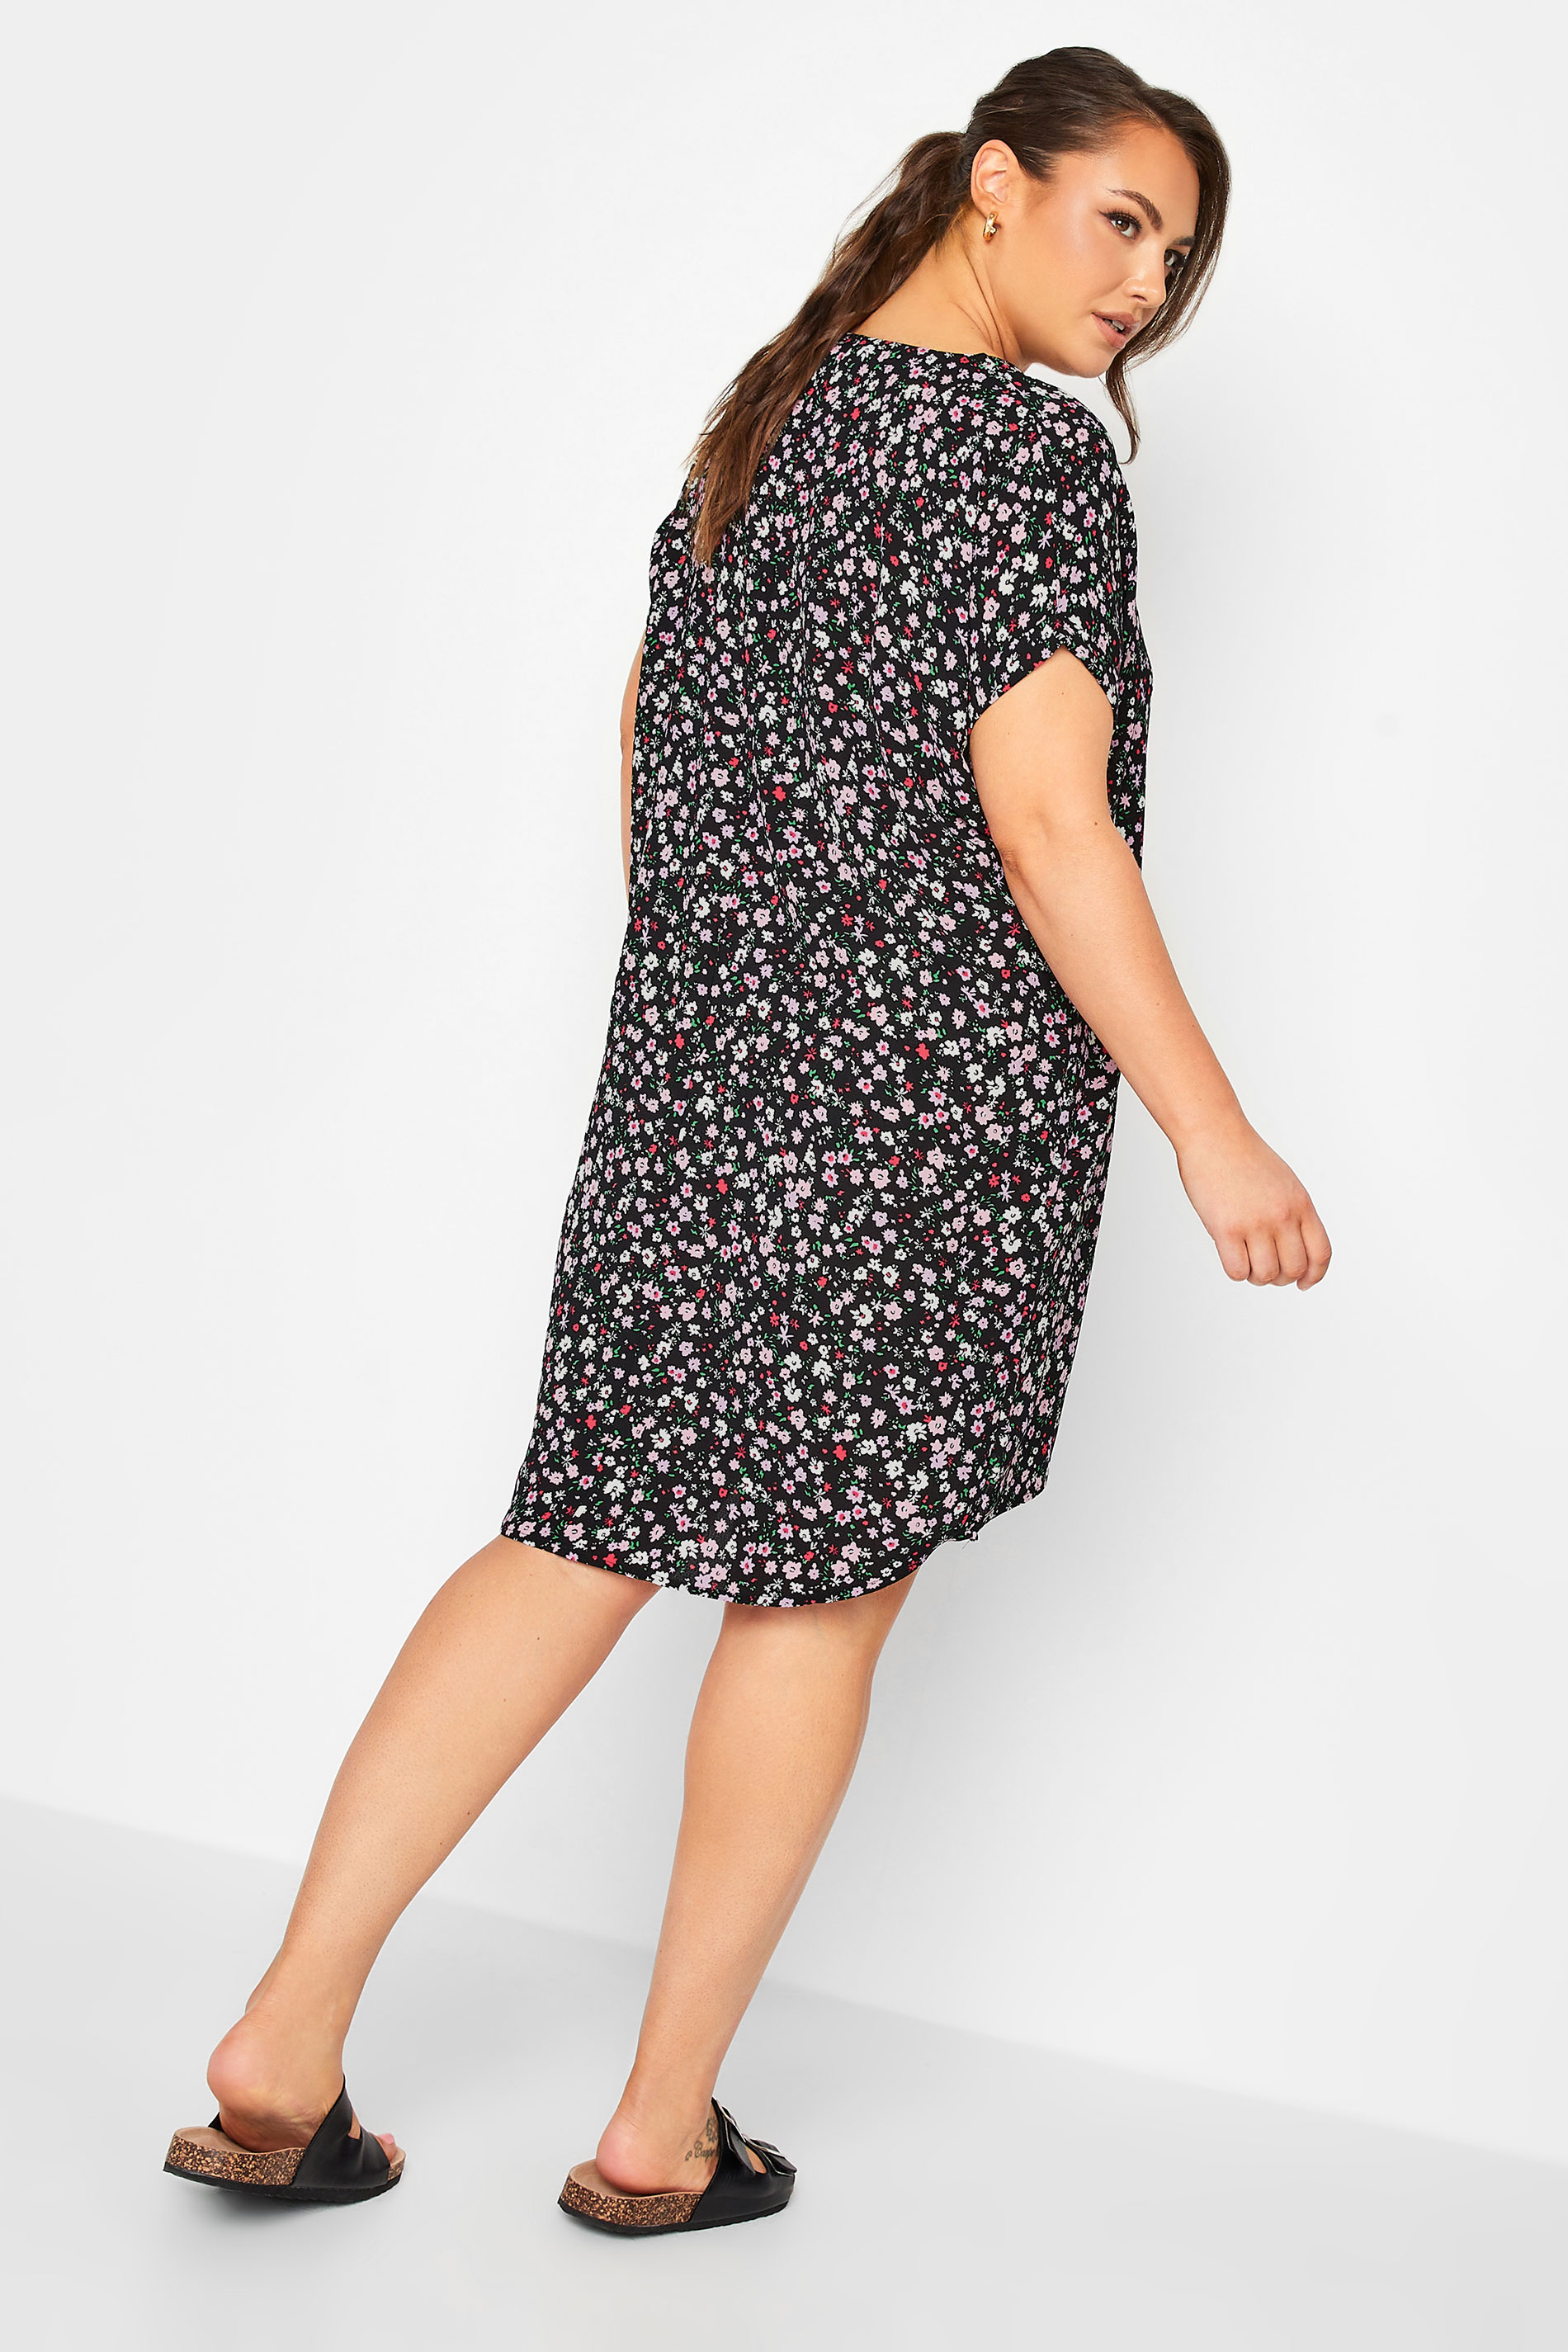 YOURS Plus Size Black Ditsy Print Shift Dress | Yours Clothing